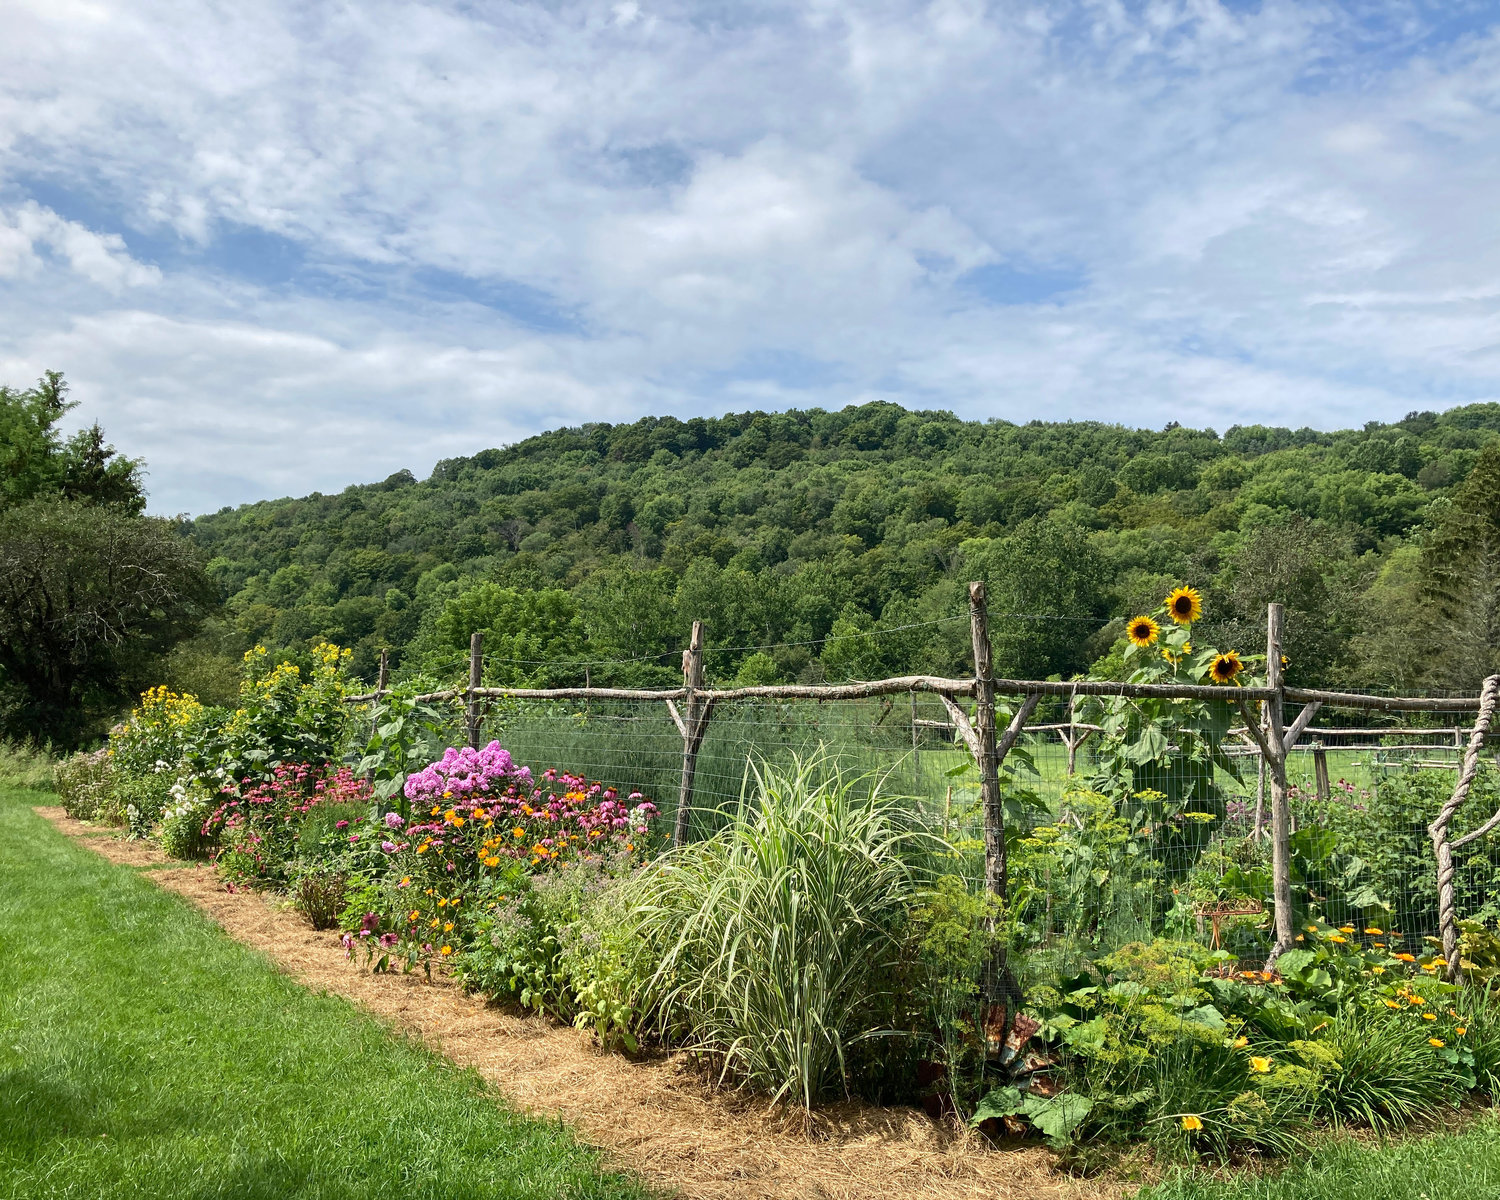 Tour gardens in Bethel, White Sulphur Springs and North Branch on Saturday, August 13.